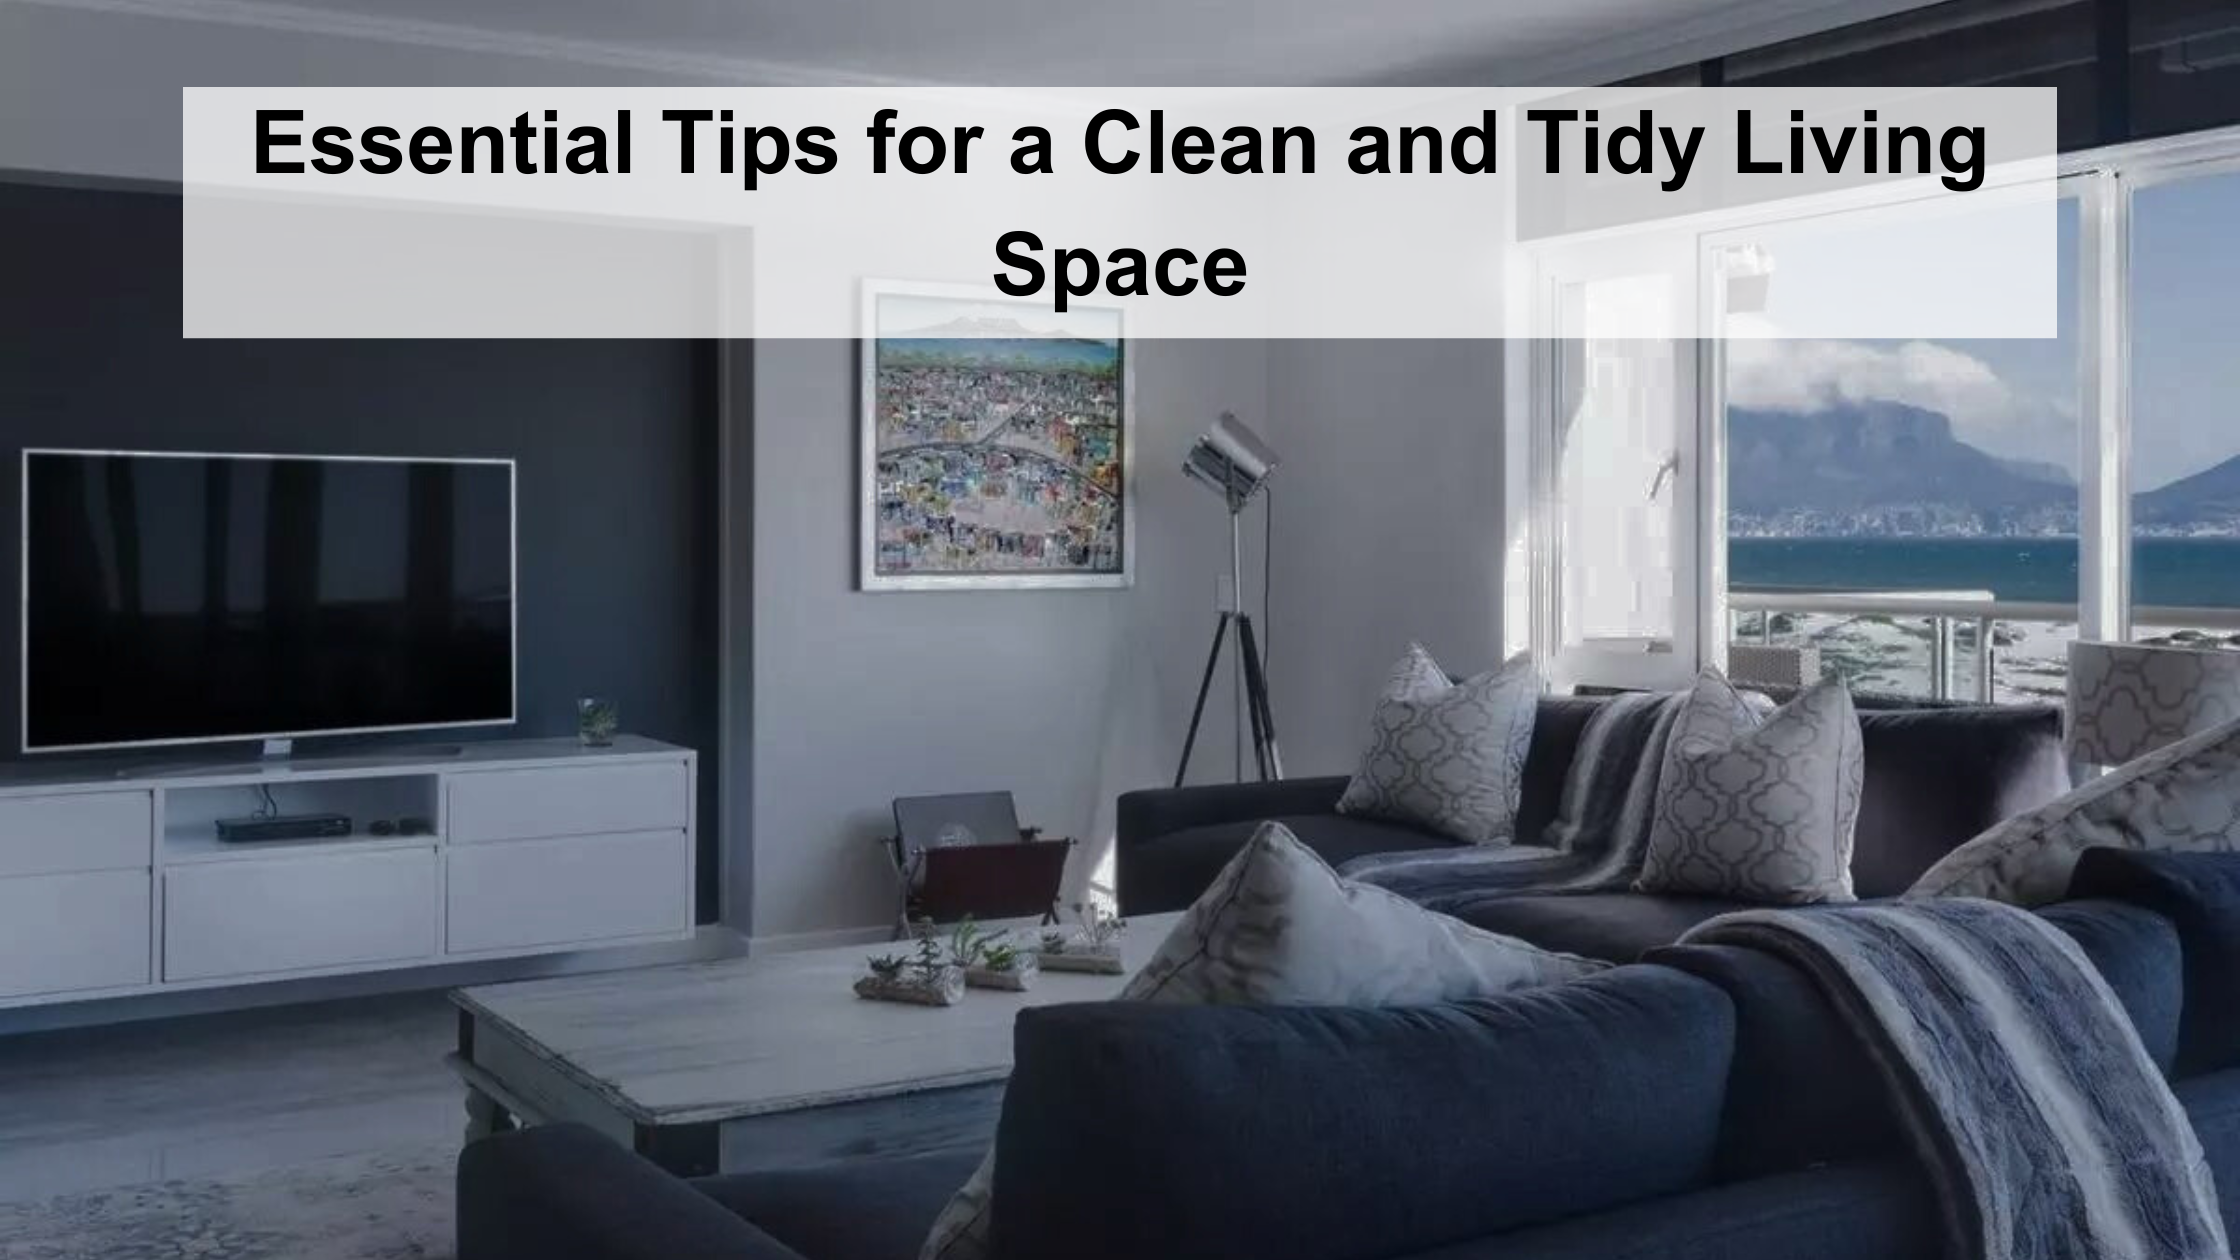 Clean and Tidy Living Space